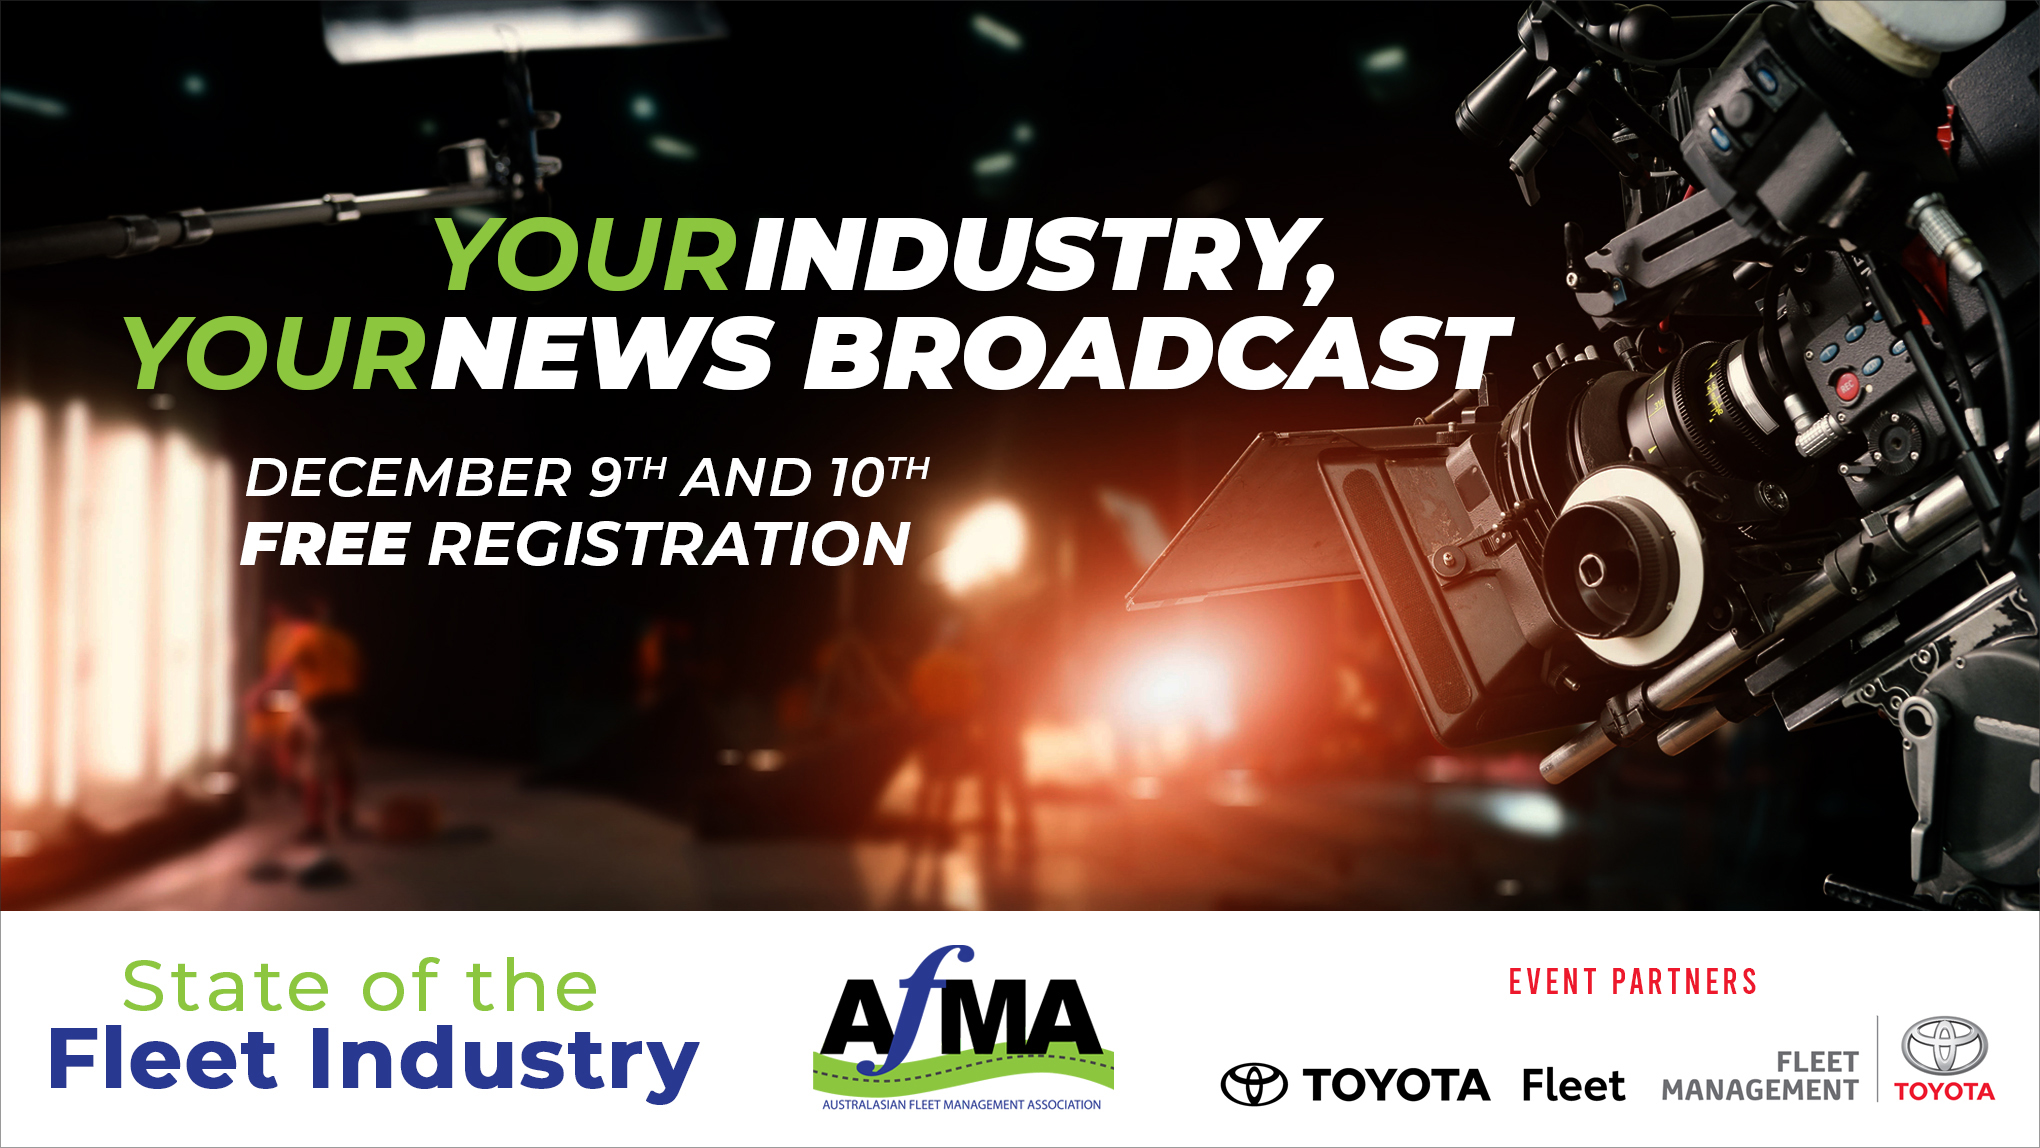 Just 12 days until AfMA’s industry broadcast